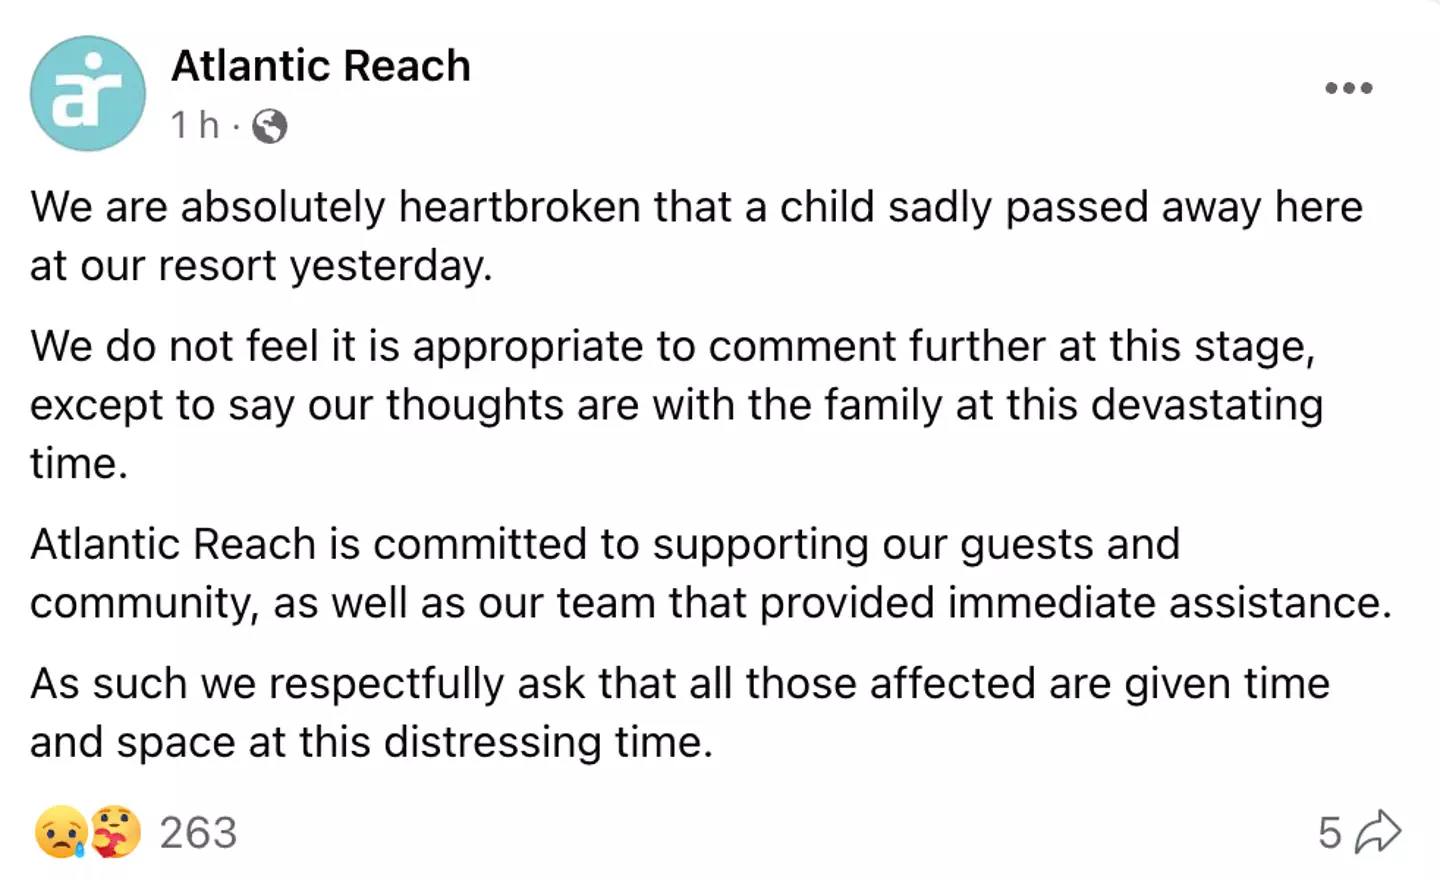 Atlantic Reach took to Facebook to address the incident.